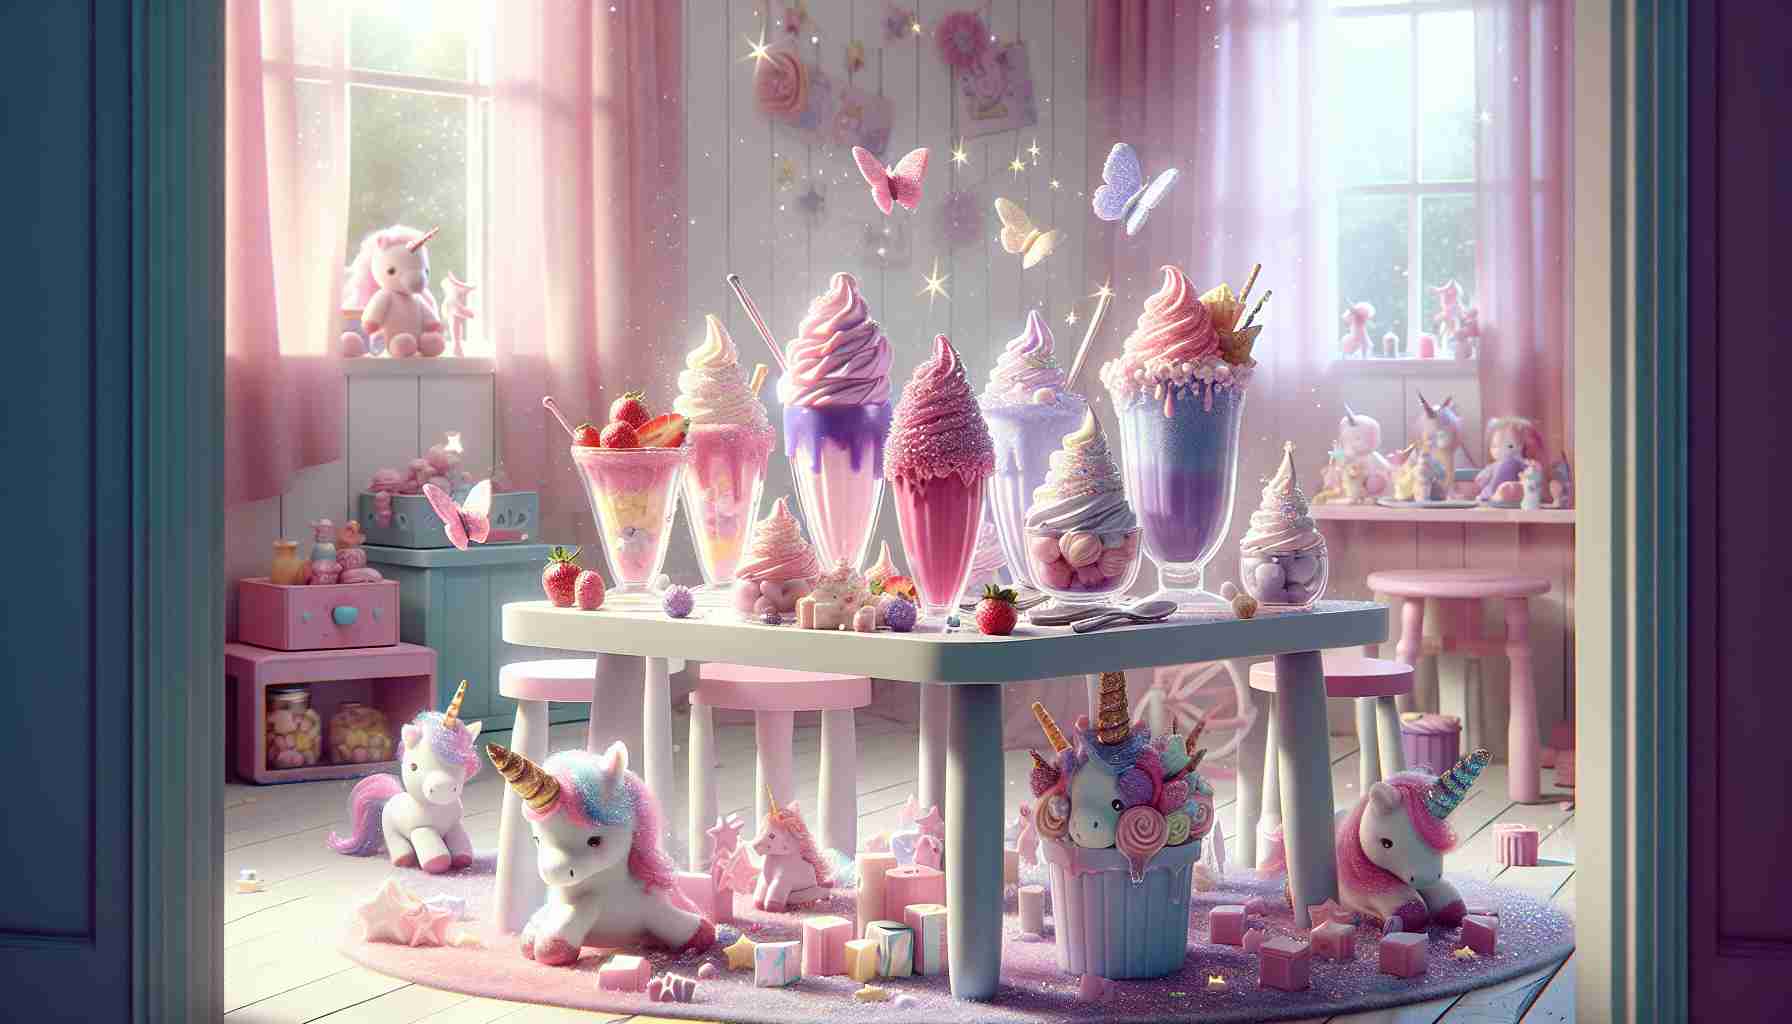 A realistically rendered, high-definition image showcasing the magic of children's dreamy playtime. Imagine a scene featuring a table laden with enticing frozen treats, inspired by the favorite hues of a cherished childhood doll: pinks and purples, pastels and sparkles. Strawberry ice cream sundaes, blueberry sorbets, and vanilla unicorn milkshakes, all garnished with glistening sprinkles, glittering sugar butterflies, and tiny marshmallow unicorns. The scene is set in a light-filled, pastel-coloured room, with child-sized furniture and enchanted toys scattered around, fostering an ambiance of sweet innocence and nostalgia.